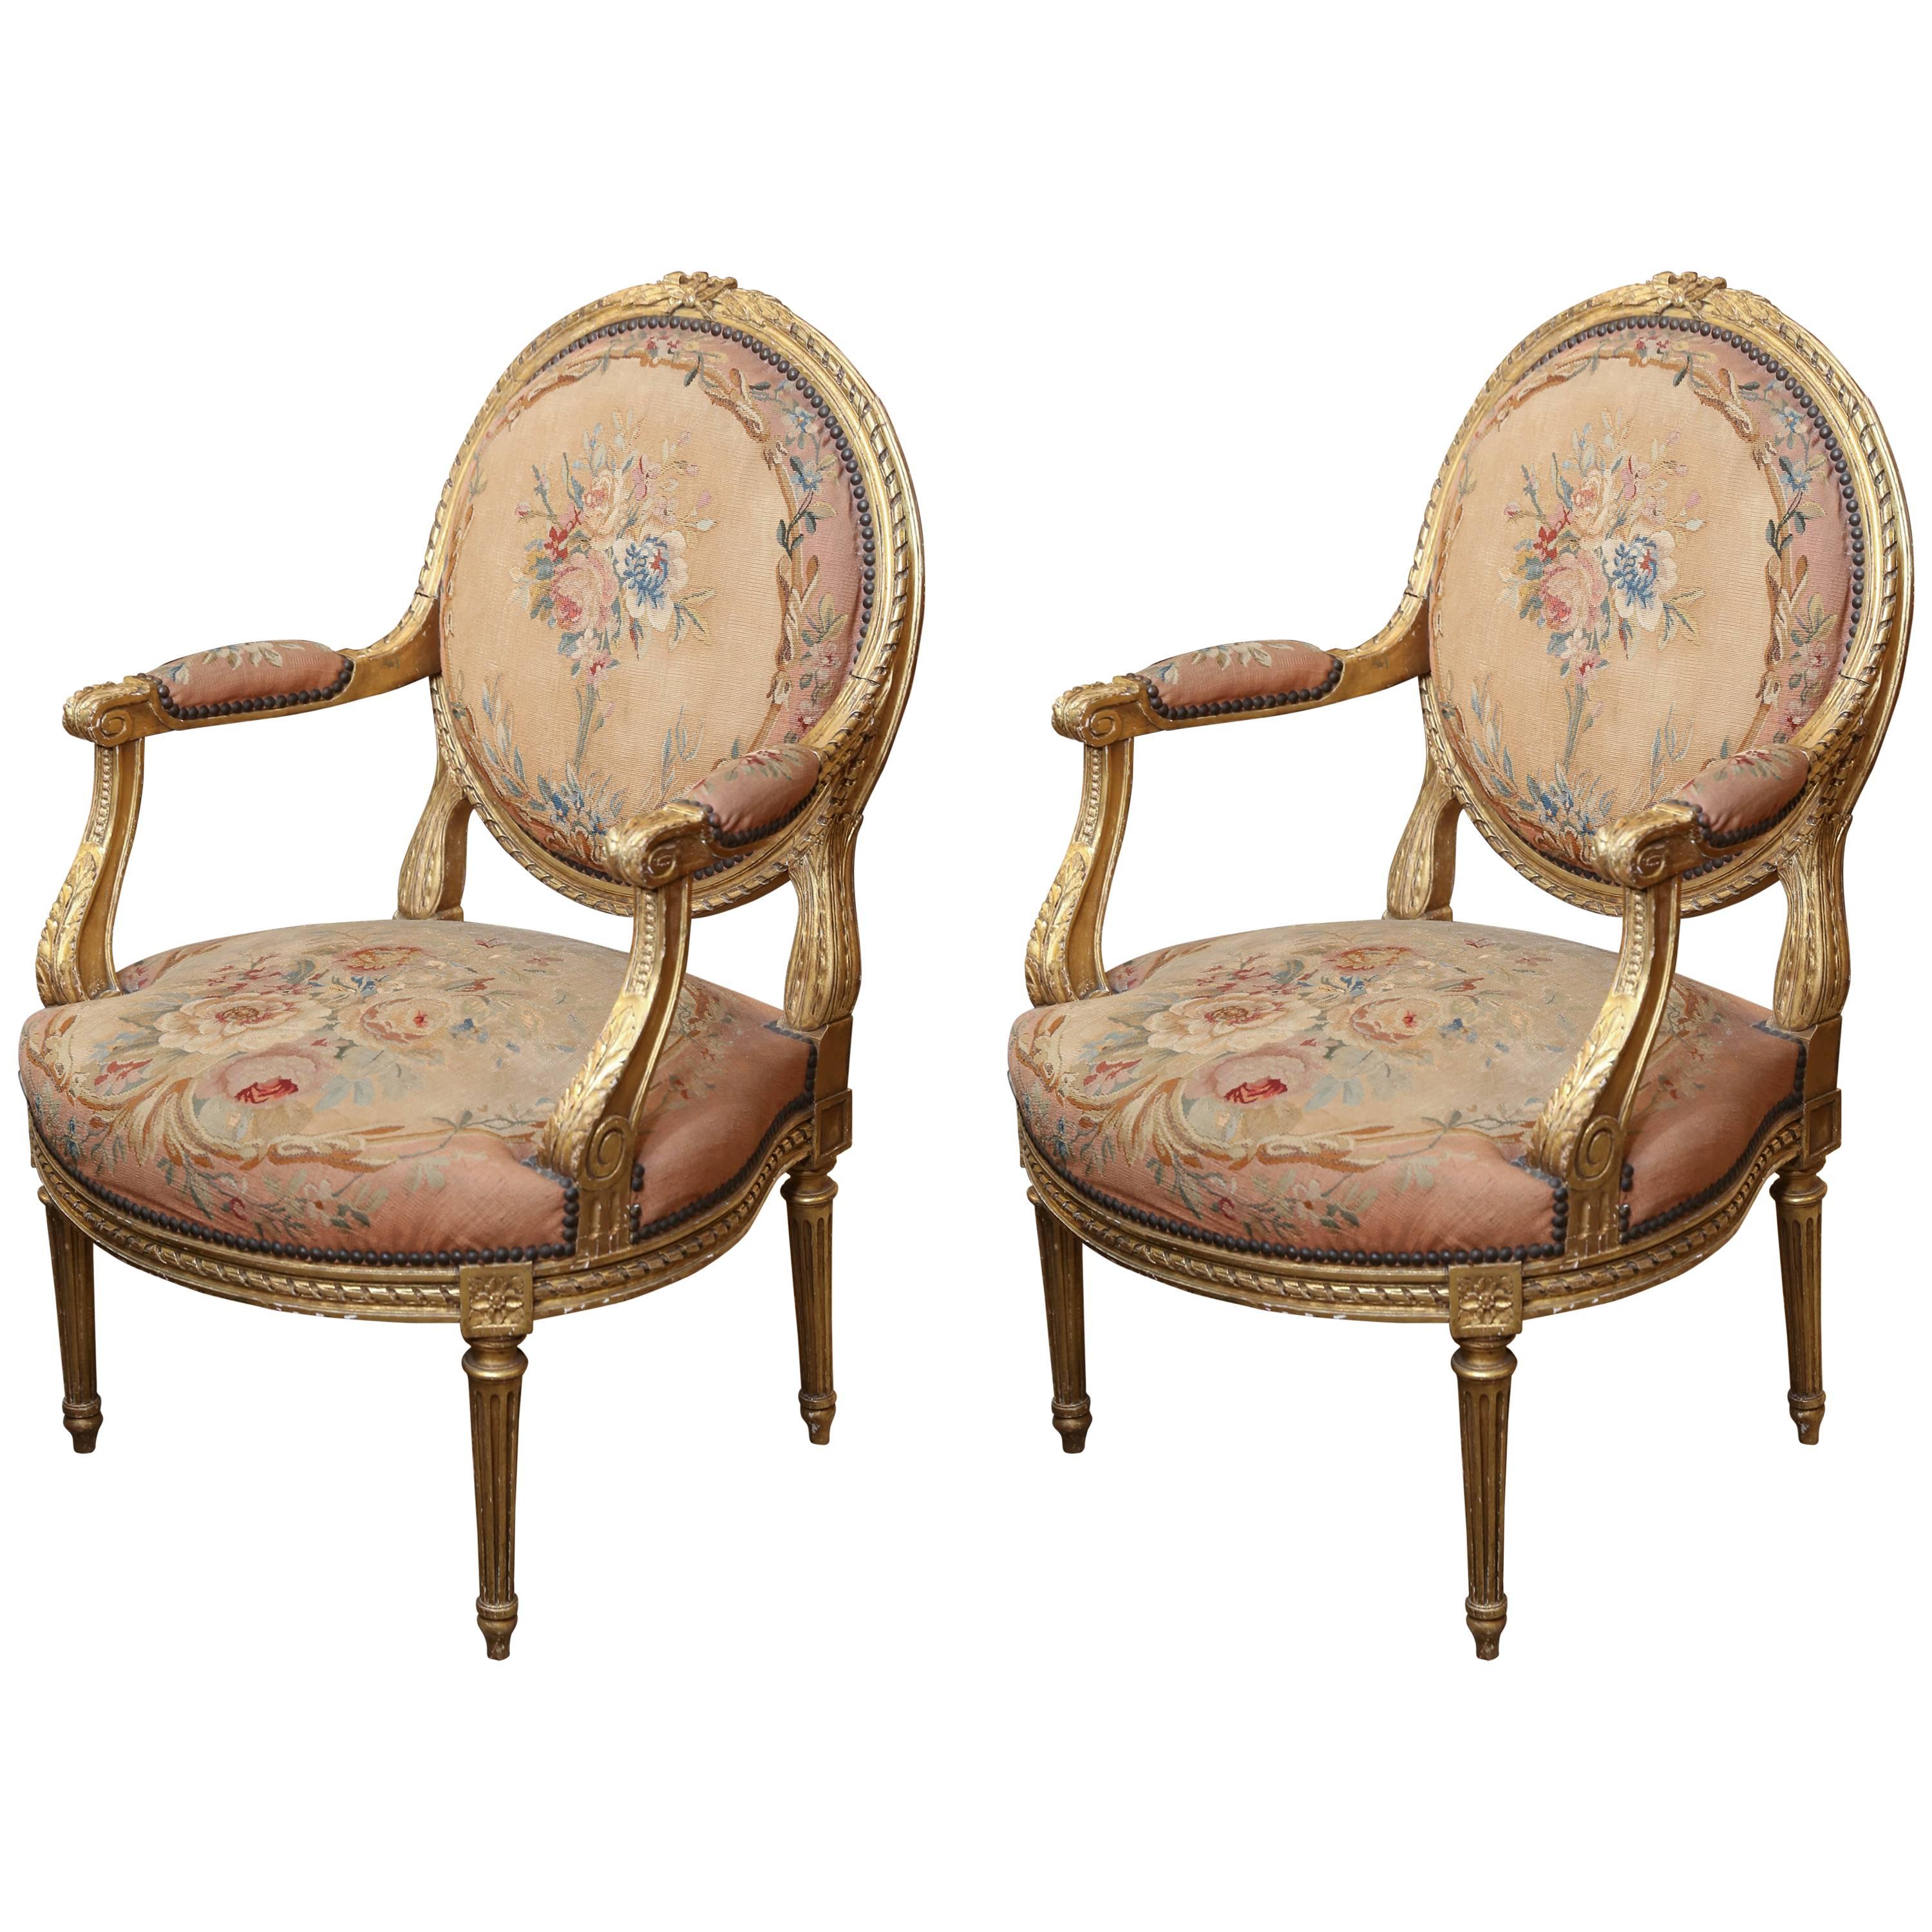 Pair of French Giltwood Louis XVI Chairs with Original Aubusson Upholstery